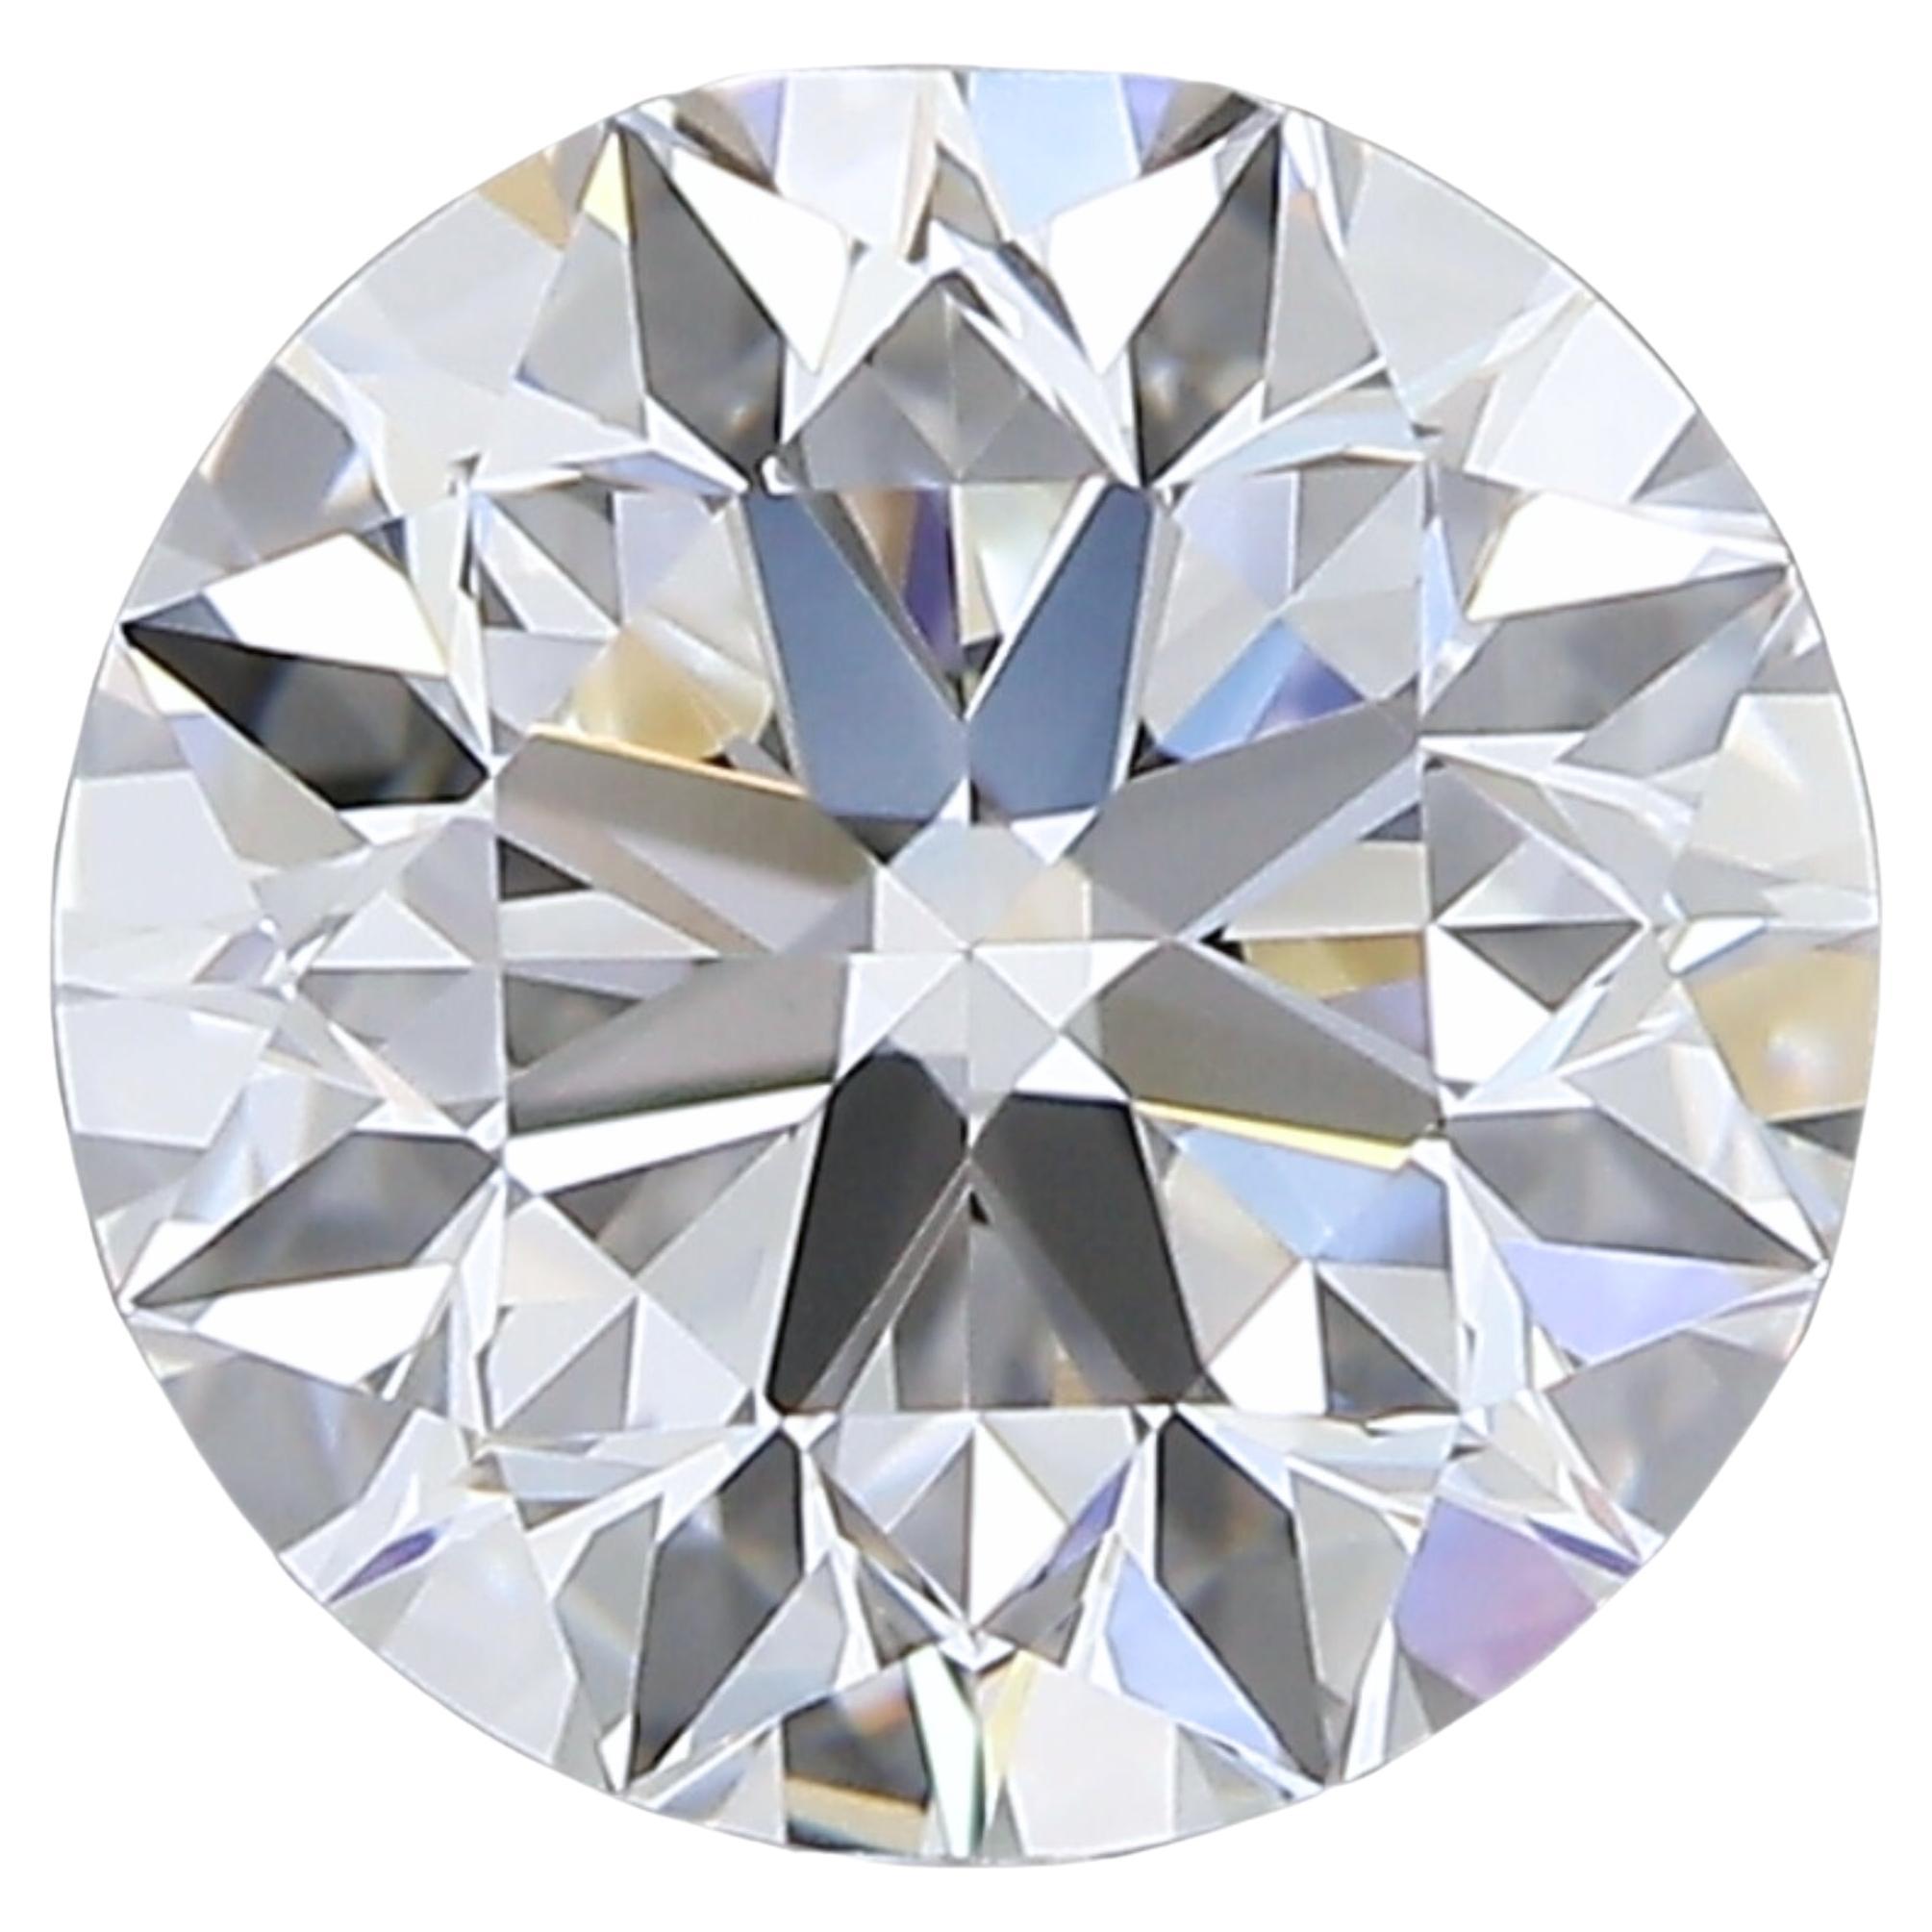 Stunning 0.90 ct Round Cut Natural Diamond For Sale